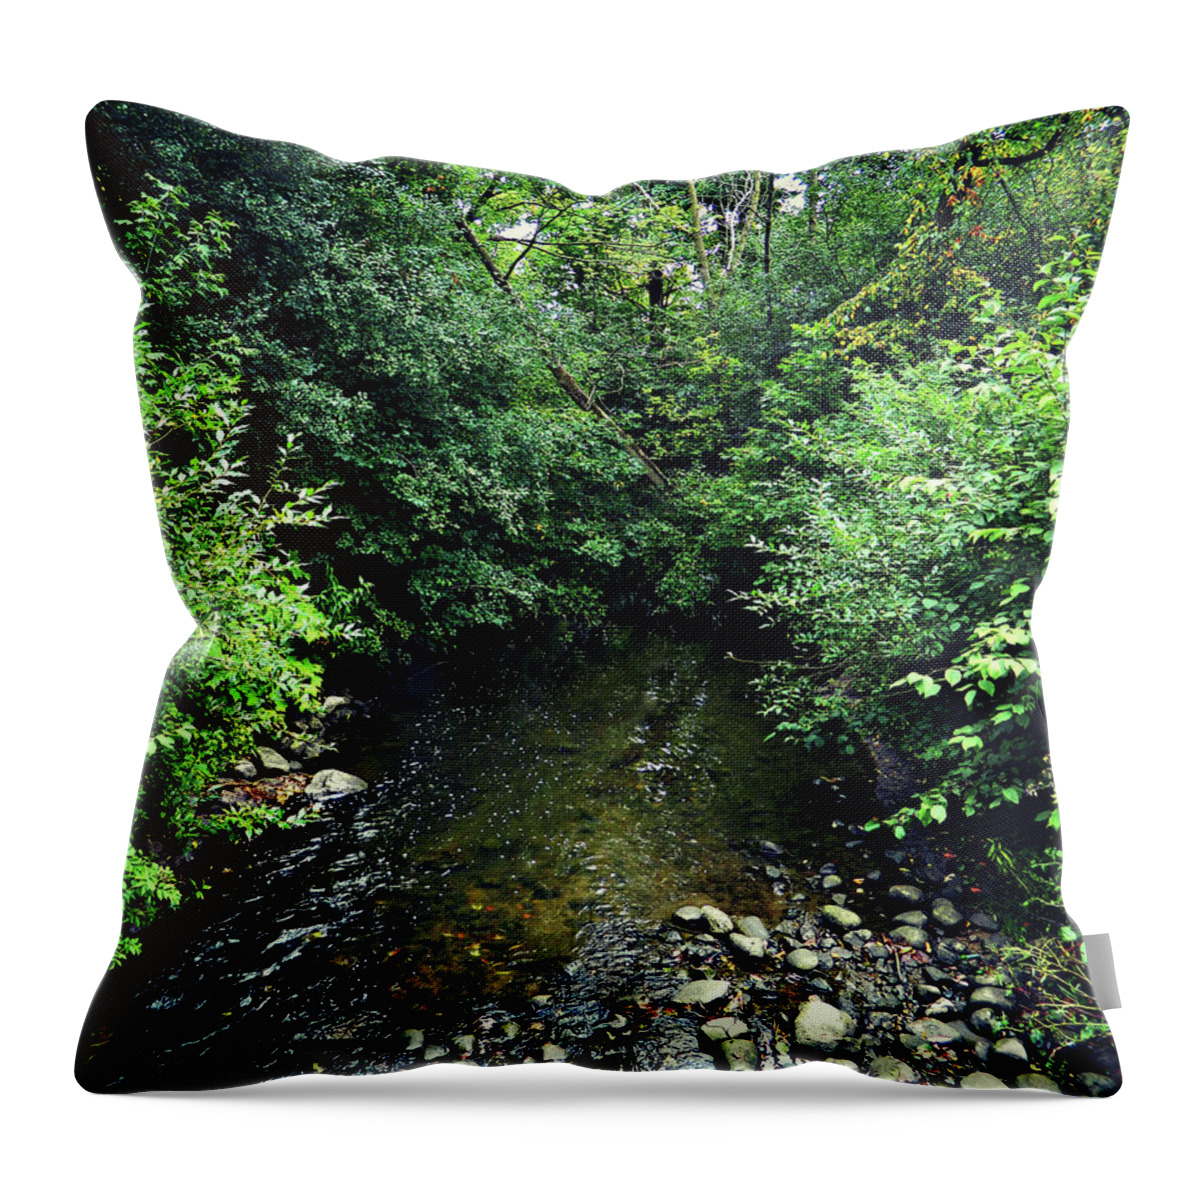 Nature Is So Sweet Throw Pillow featuring the photograph Nature Is So Sweet by Cyryn Fyrcyd